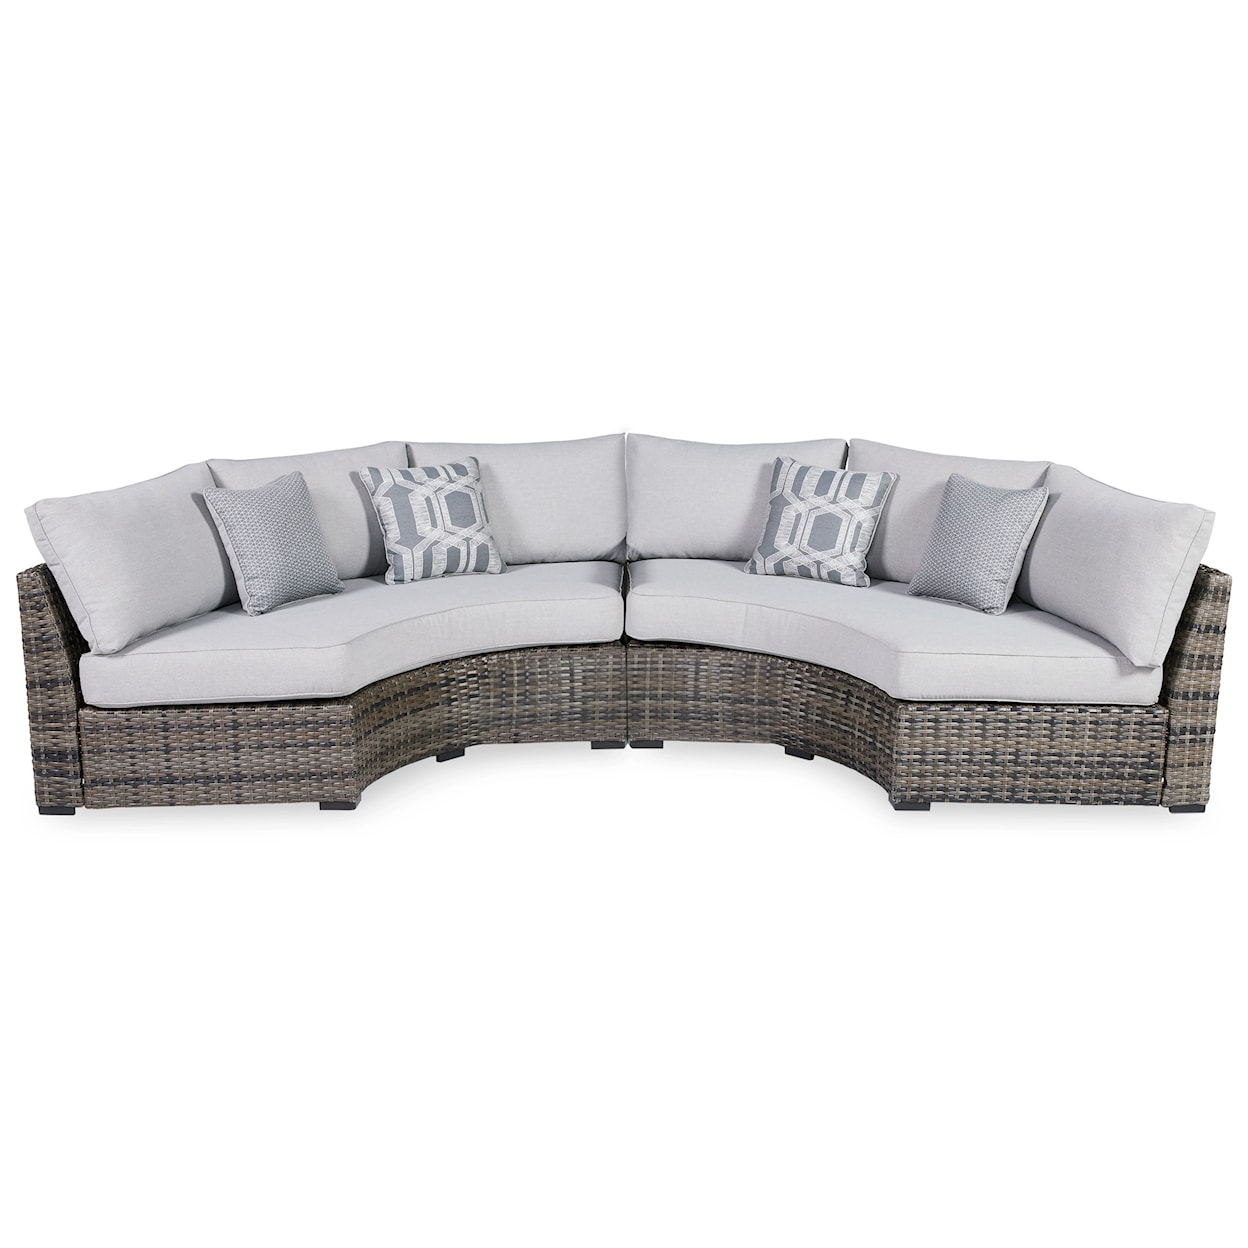 Signature Design by Ashley Harbor Court 2-Piece Outdoor Sectional